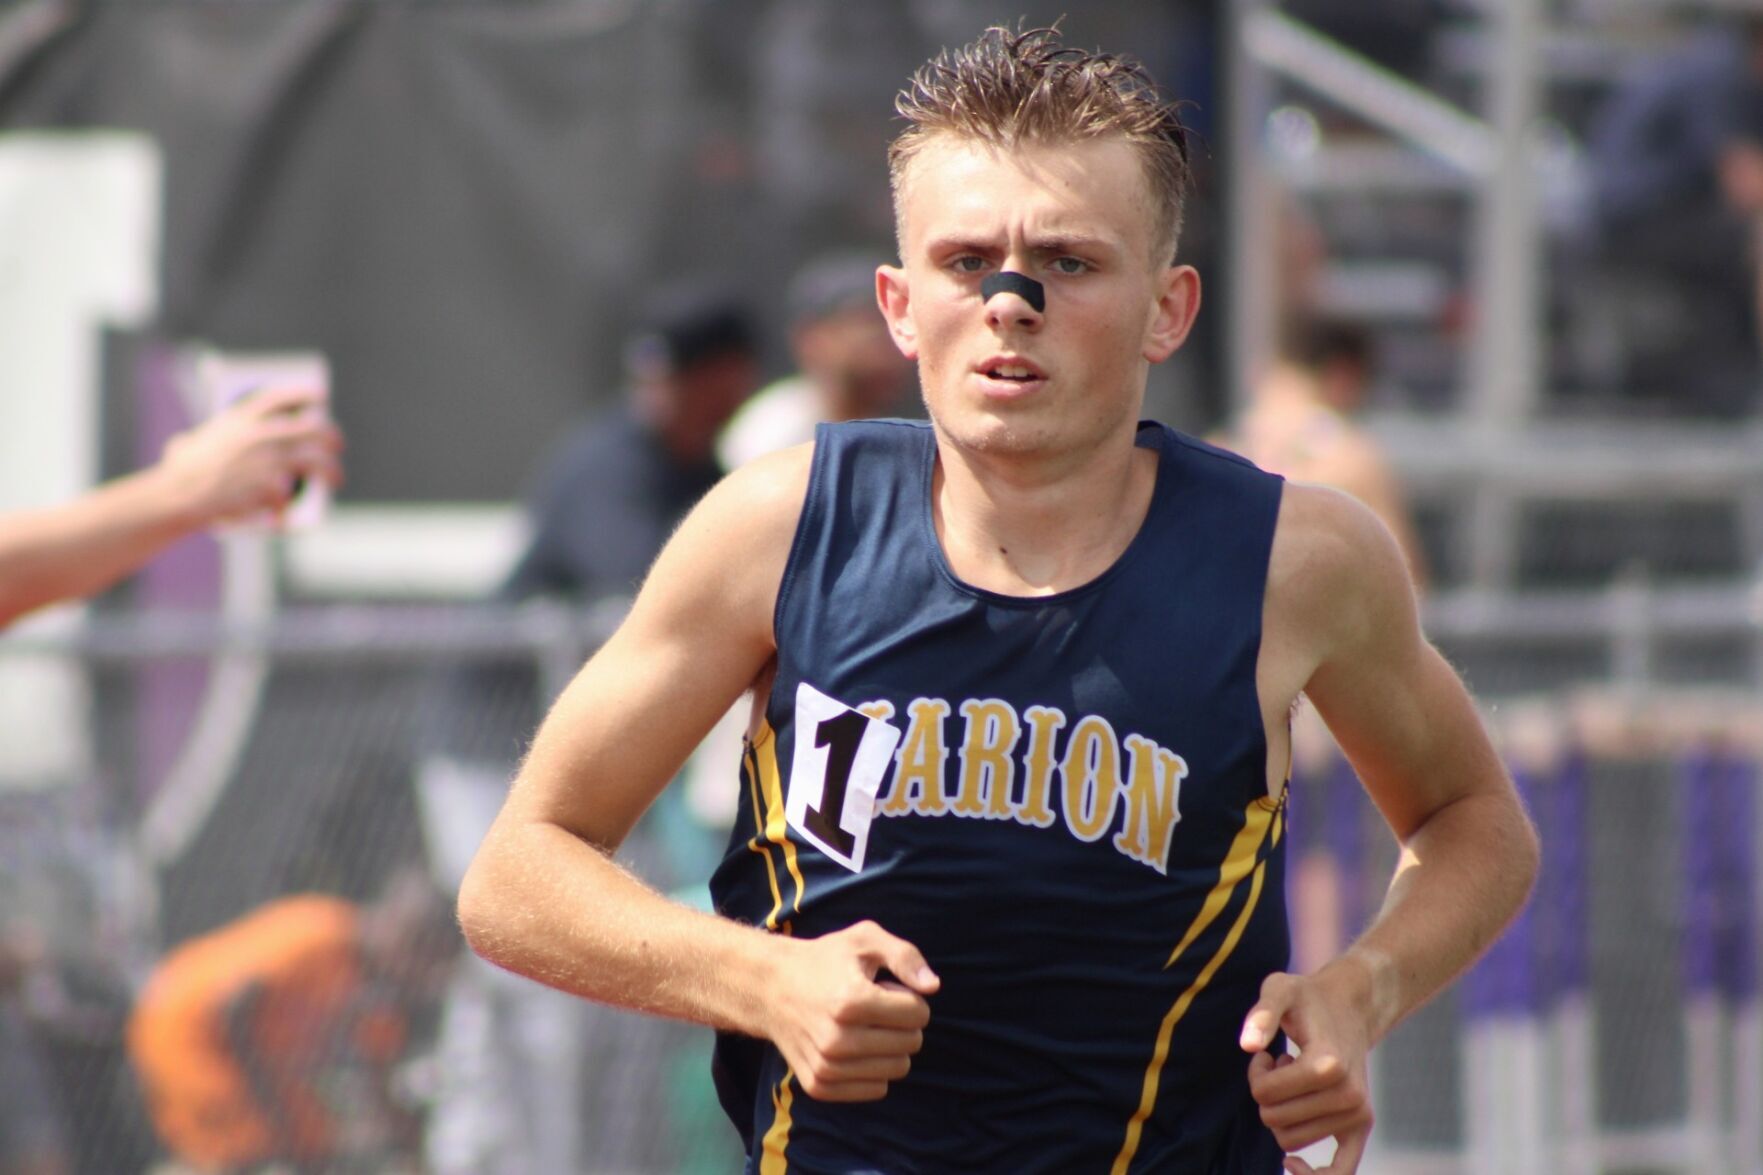 Southern Illinois Dominates IHSA Class 2A Boys Sectional Track Meet in Mascoutah